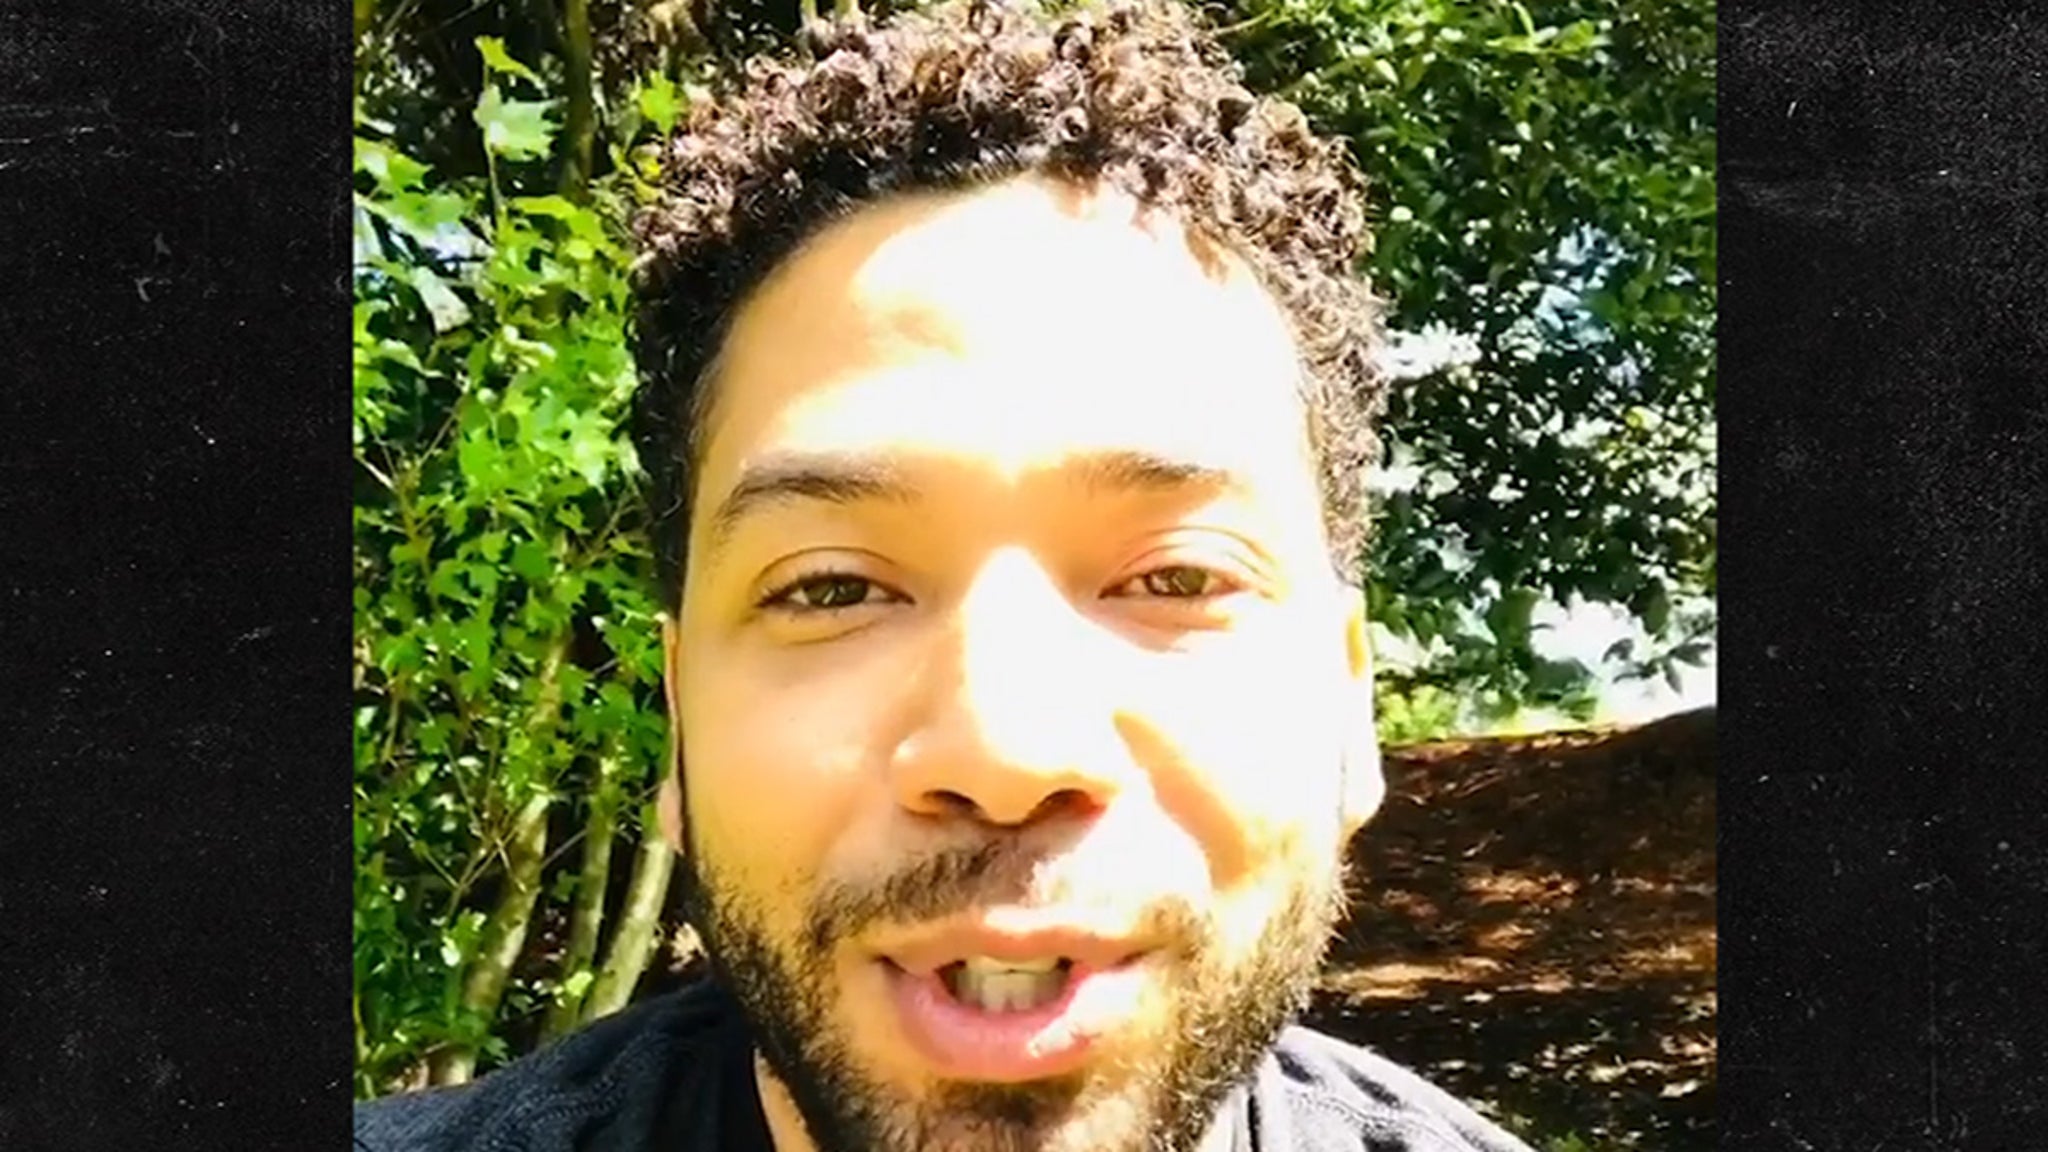 Jussie Smollett Combating Domestic Violence Amid Pandemic Spike